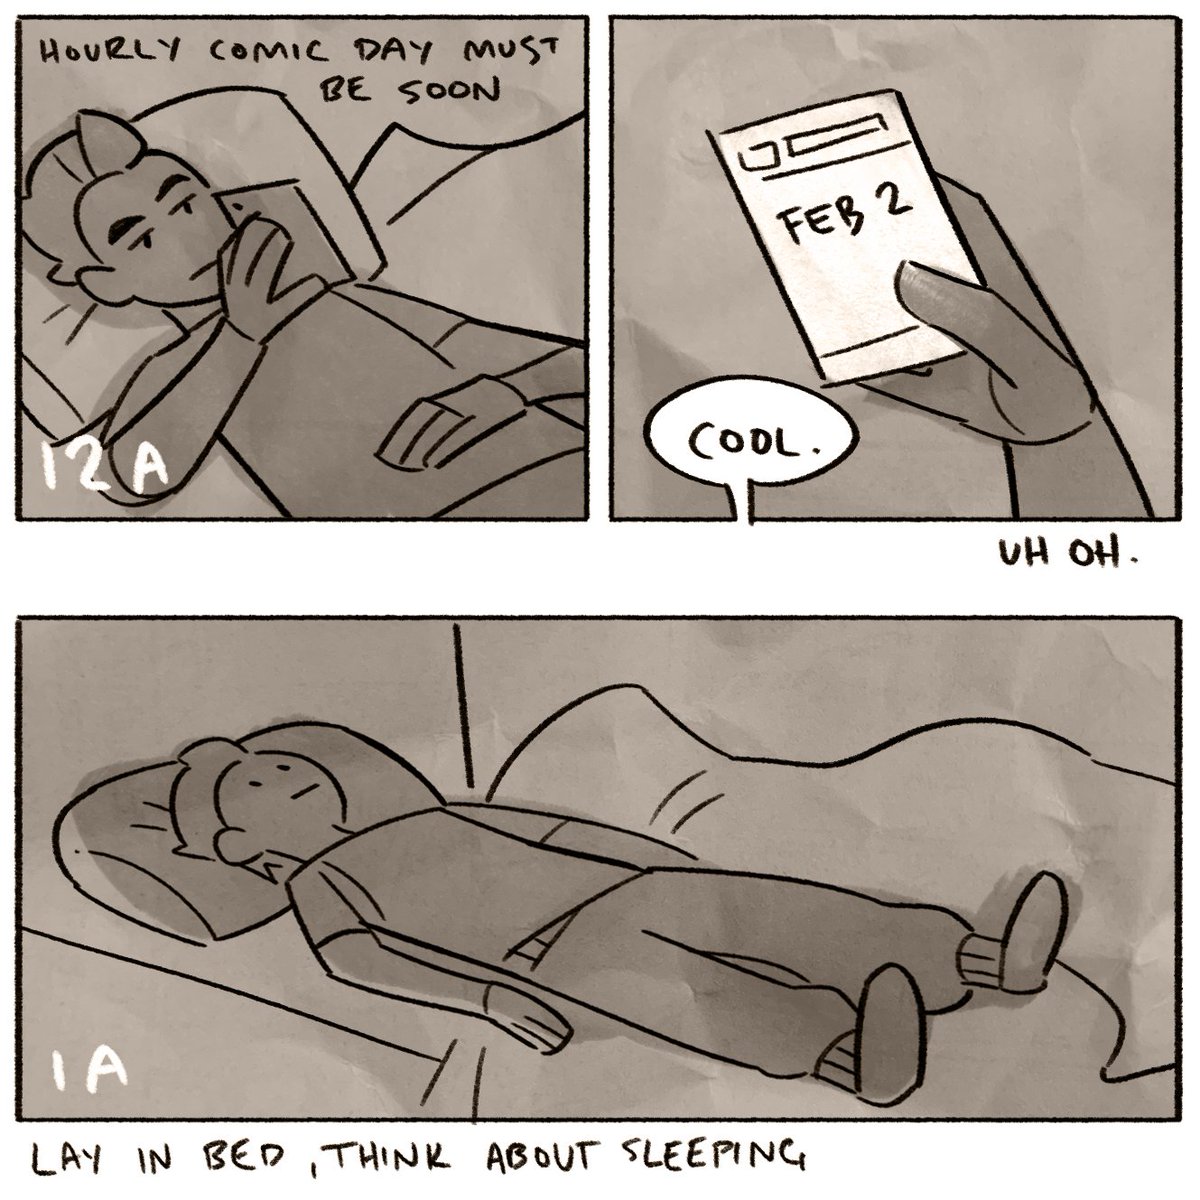 oh boy #hourlycomicday 